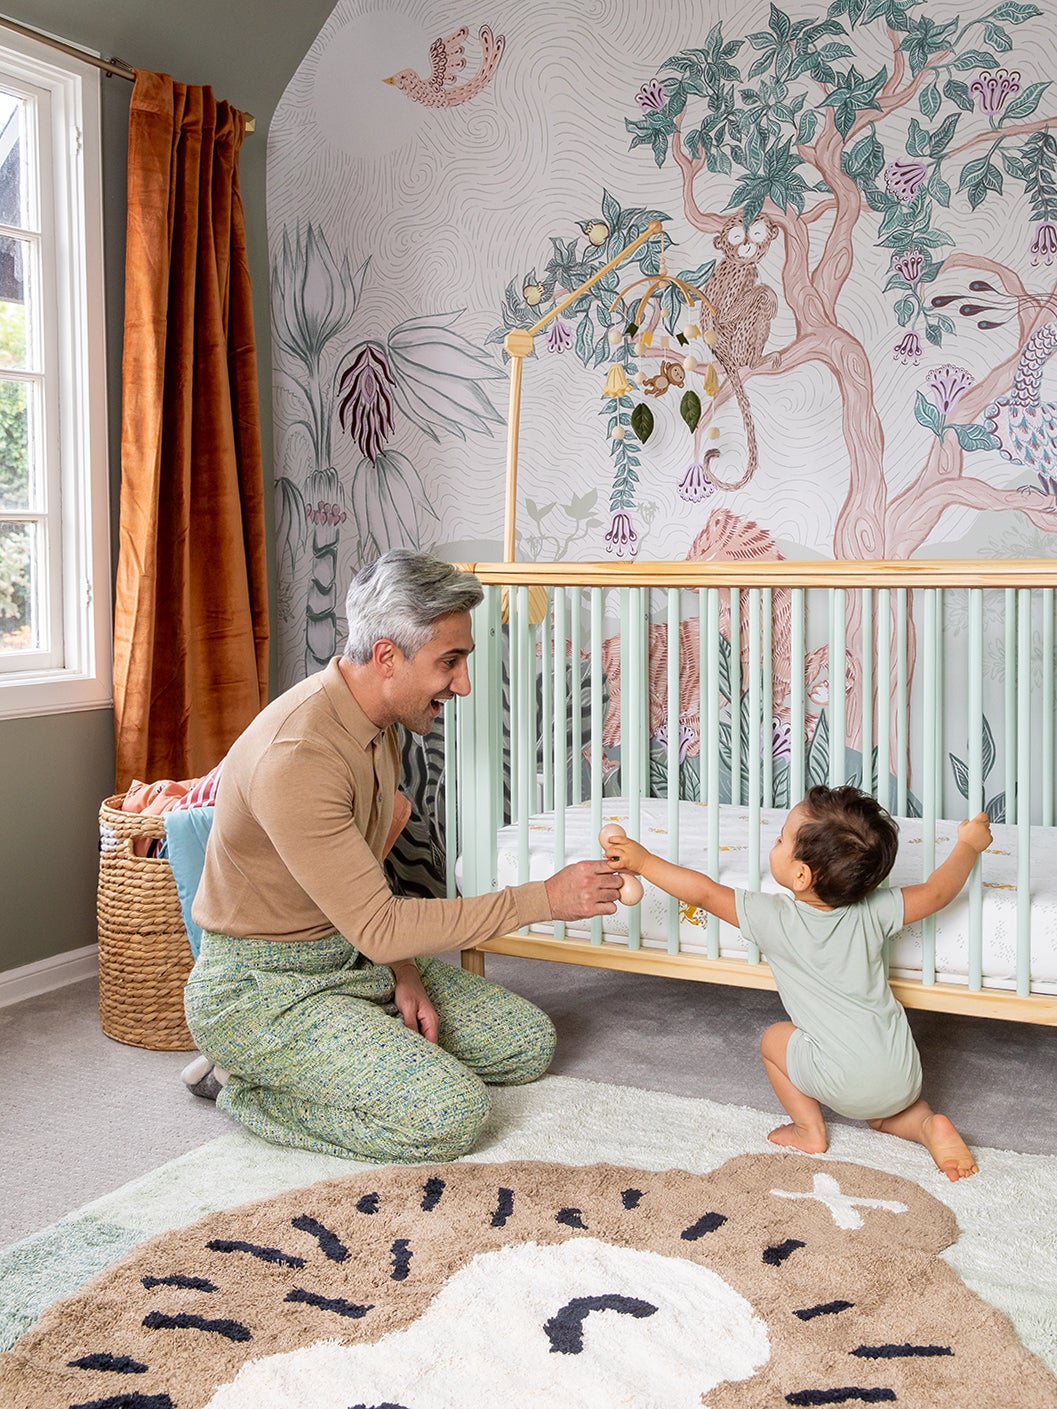 Tan France Designed a Pastel Crib to Go Front and Center in His Son's Tropical Nursery